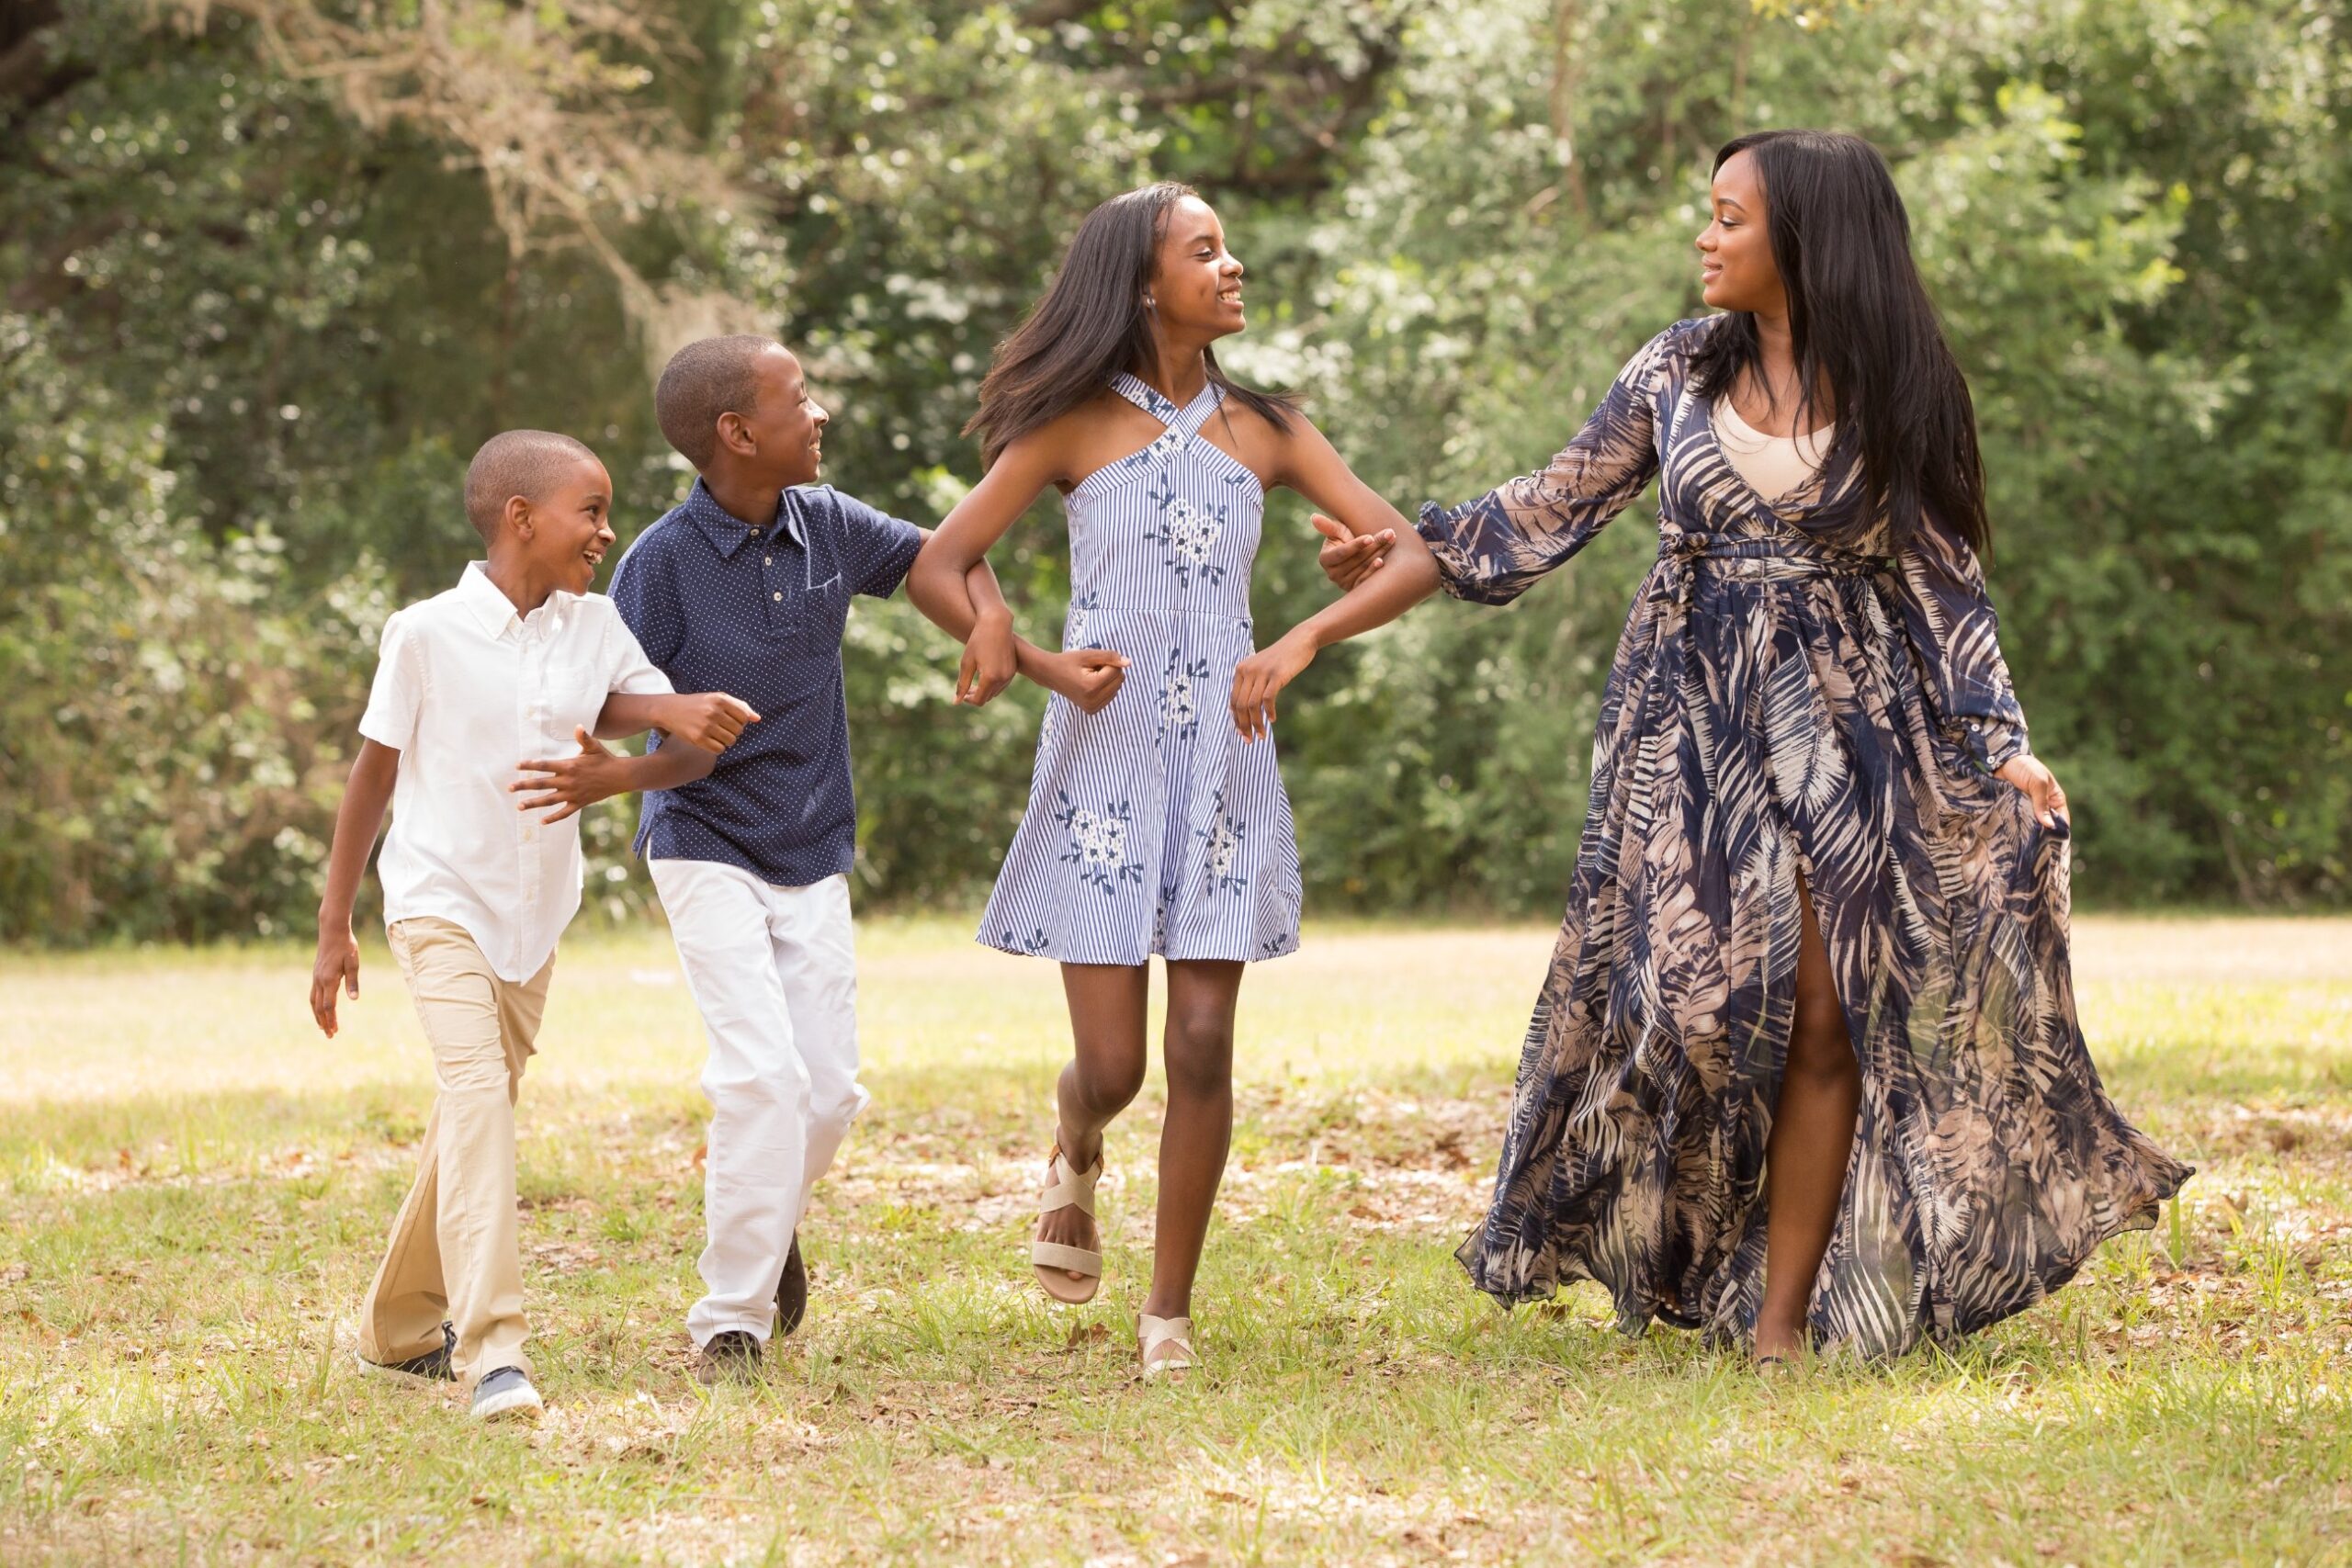 black woman and her 3 young kids skipping through a field - ideas for celebrating Mother's Day